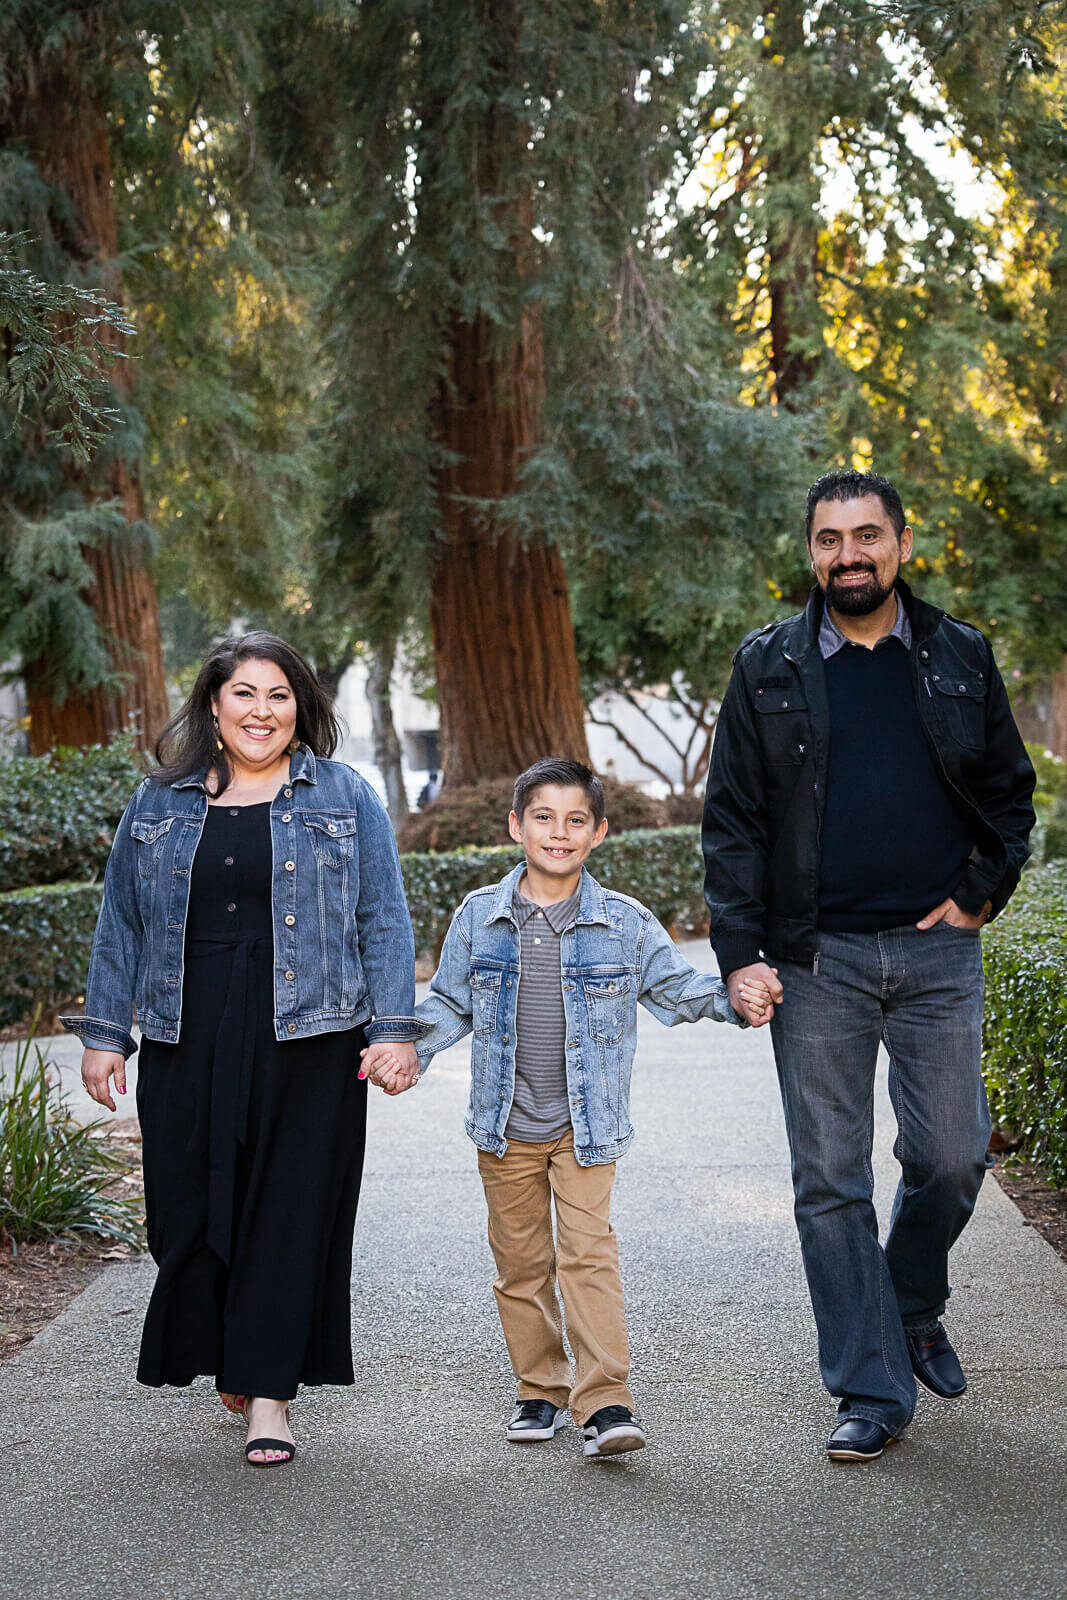 KS-Gray-Photography-family-portraits-in-orange-county-parents-and-son-walking